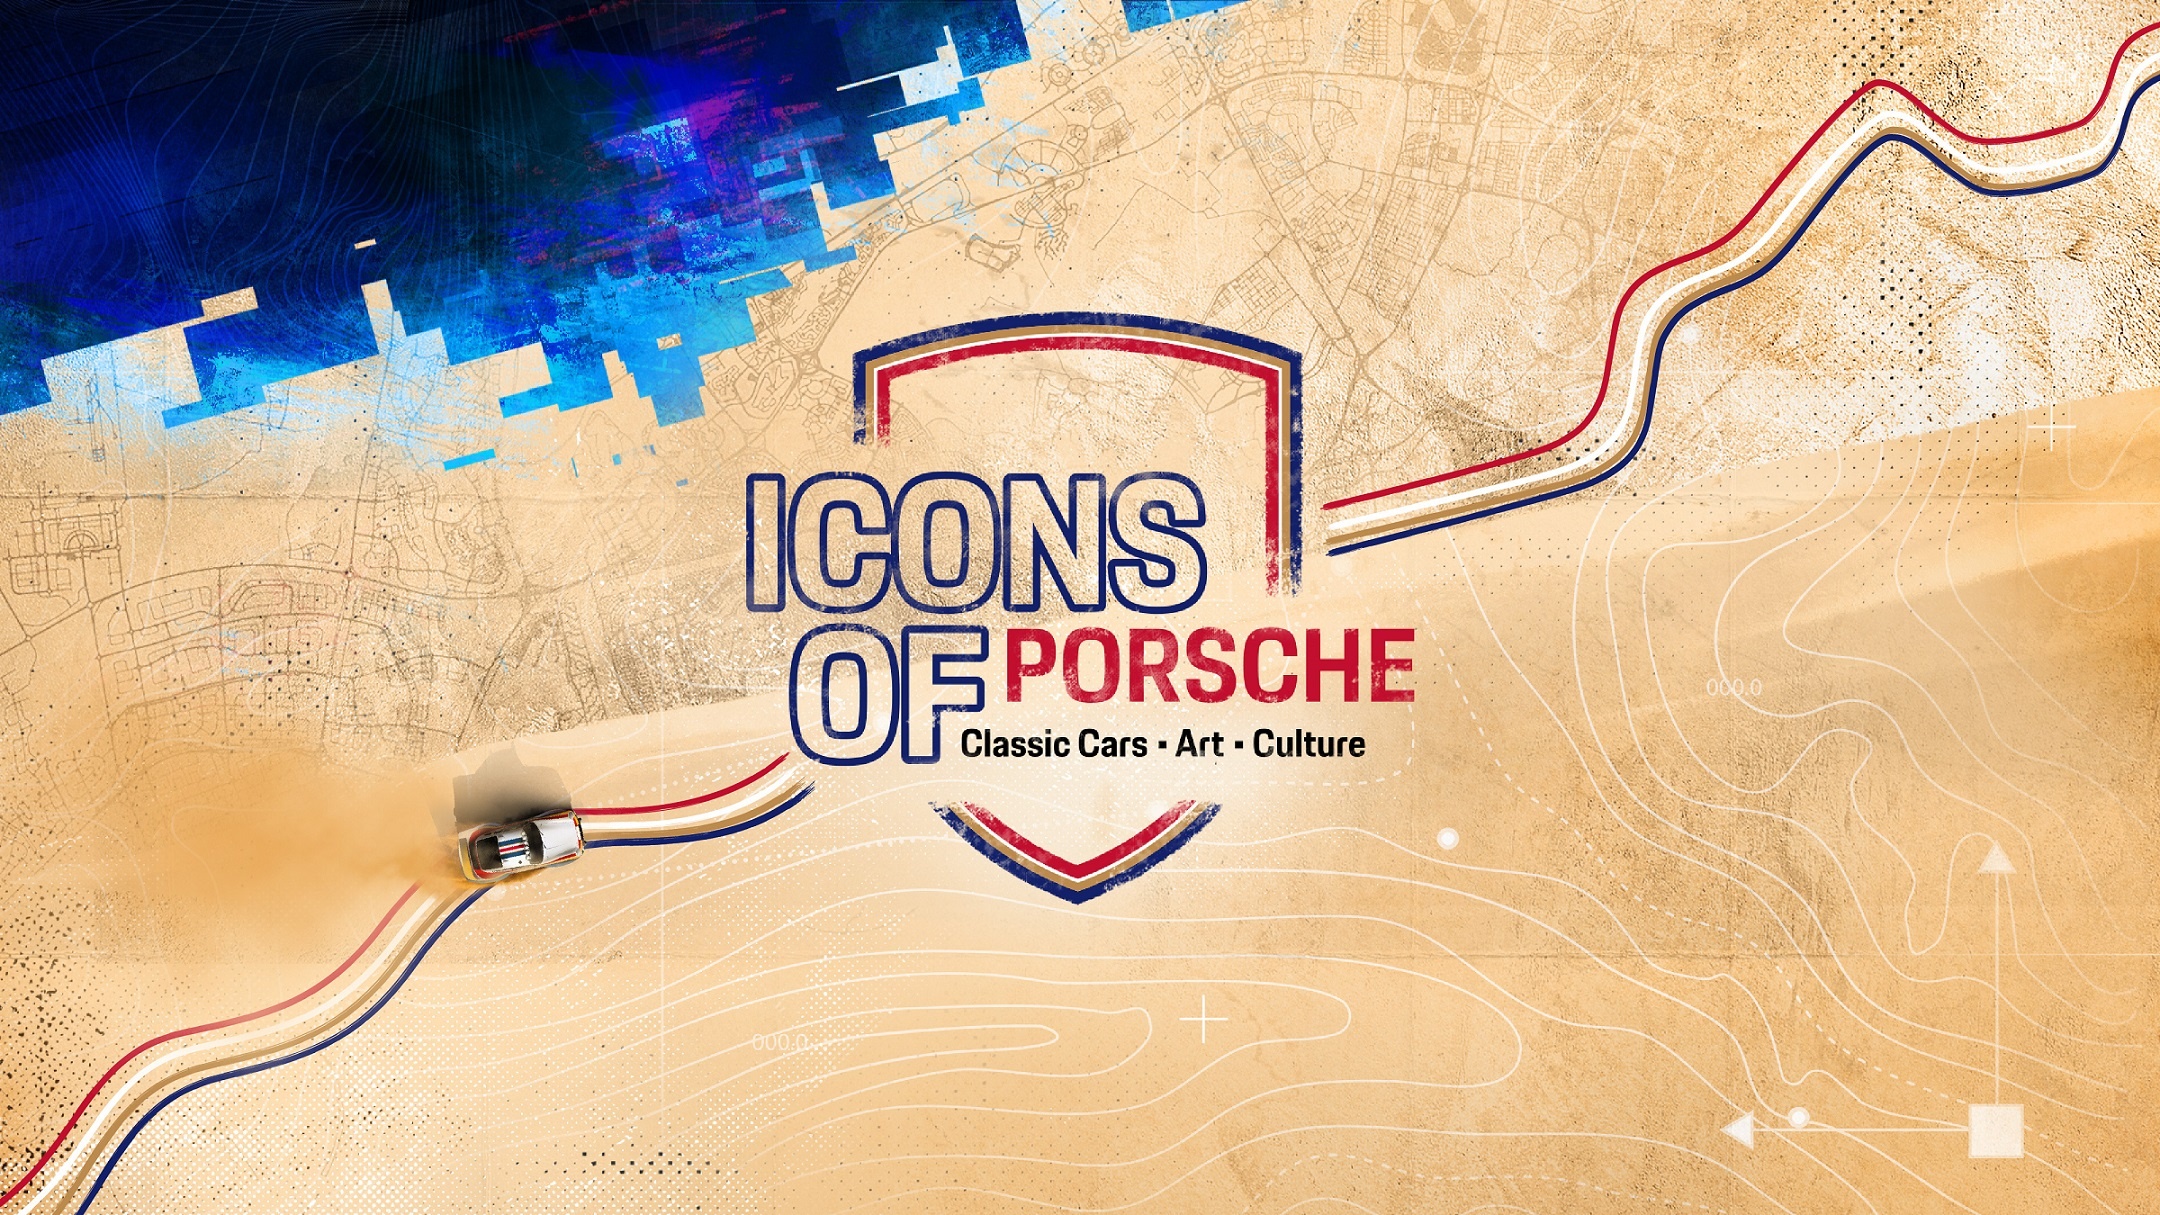 Icons of Porsche returns in November 2022 with a safari showcase and featuring a new model regional premiere